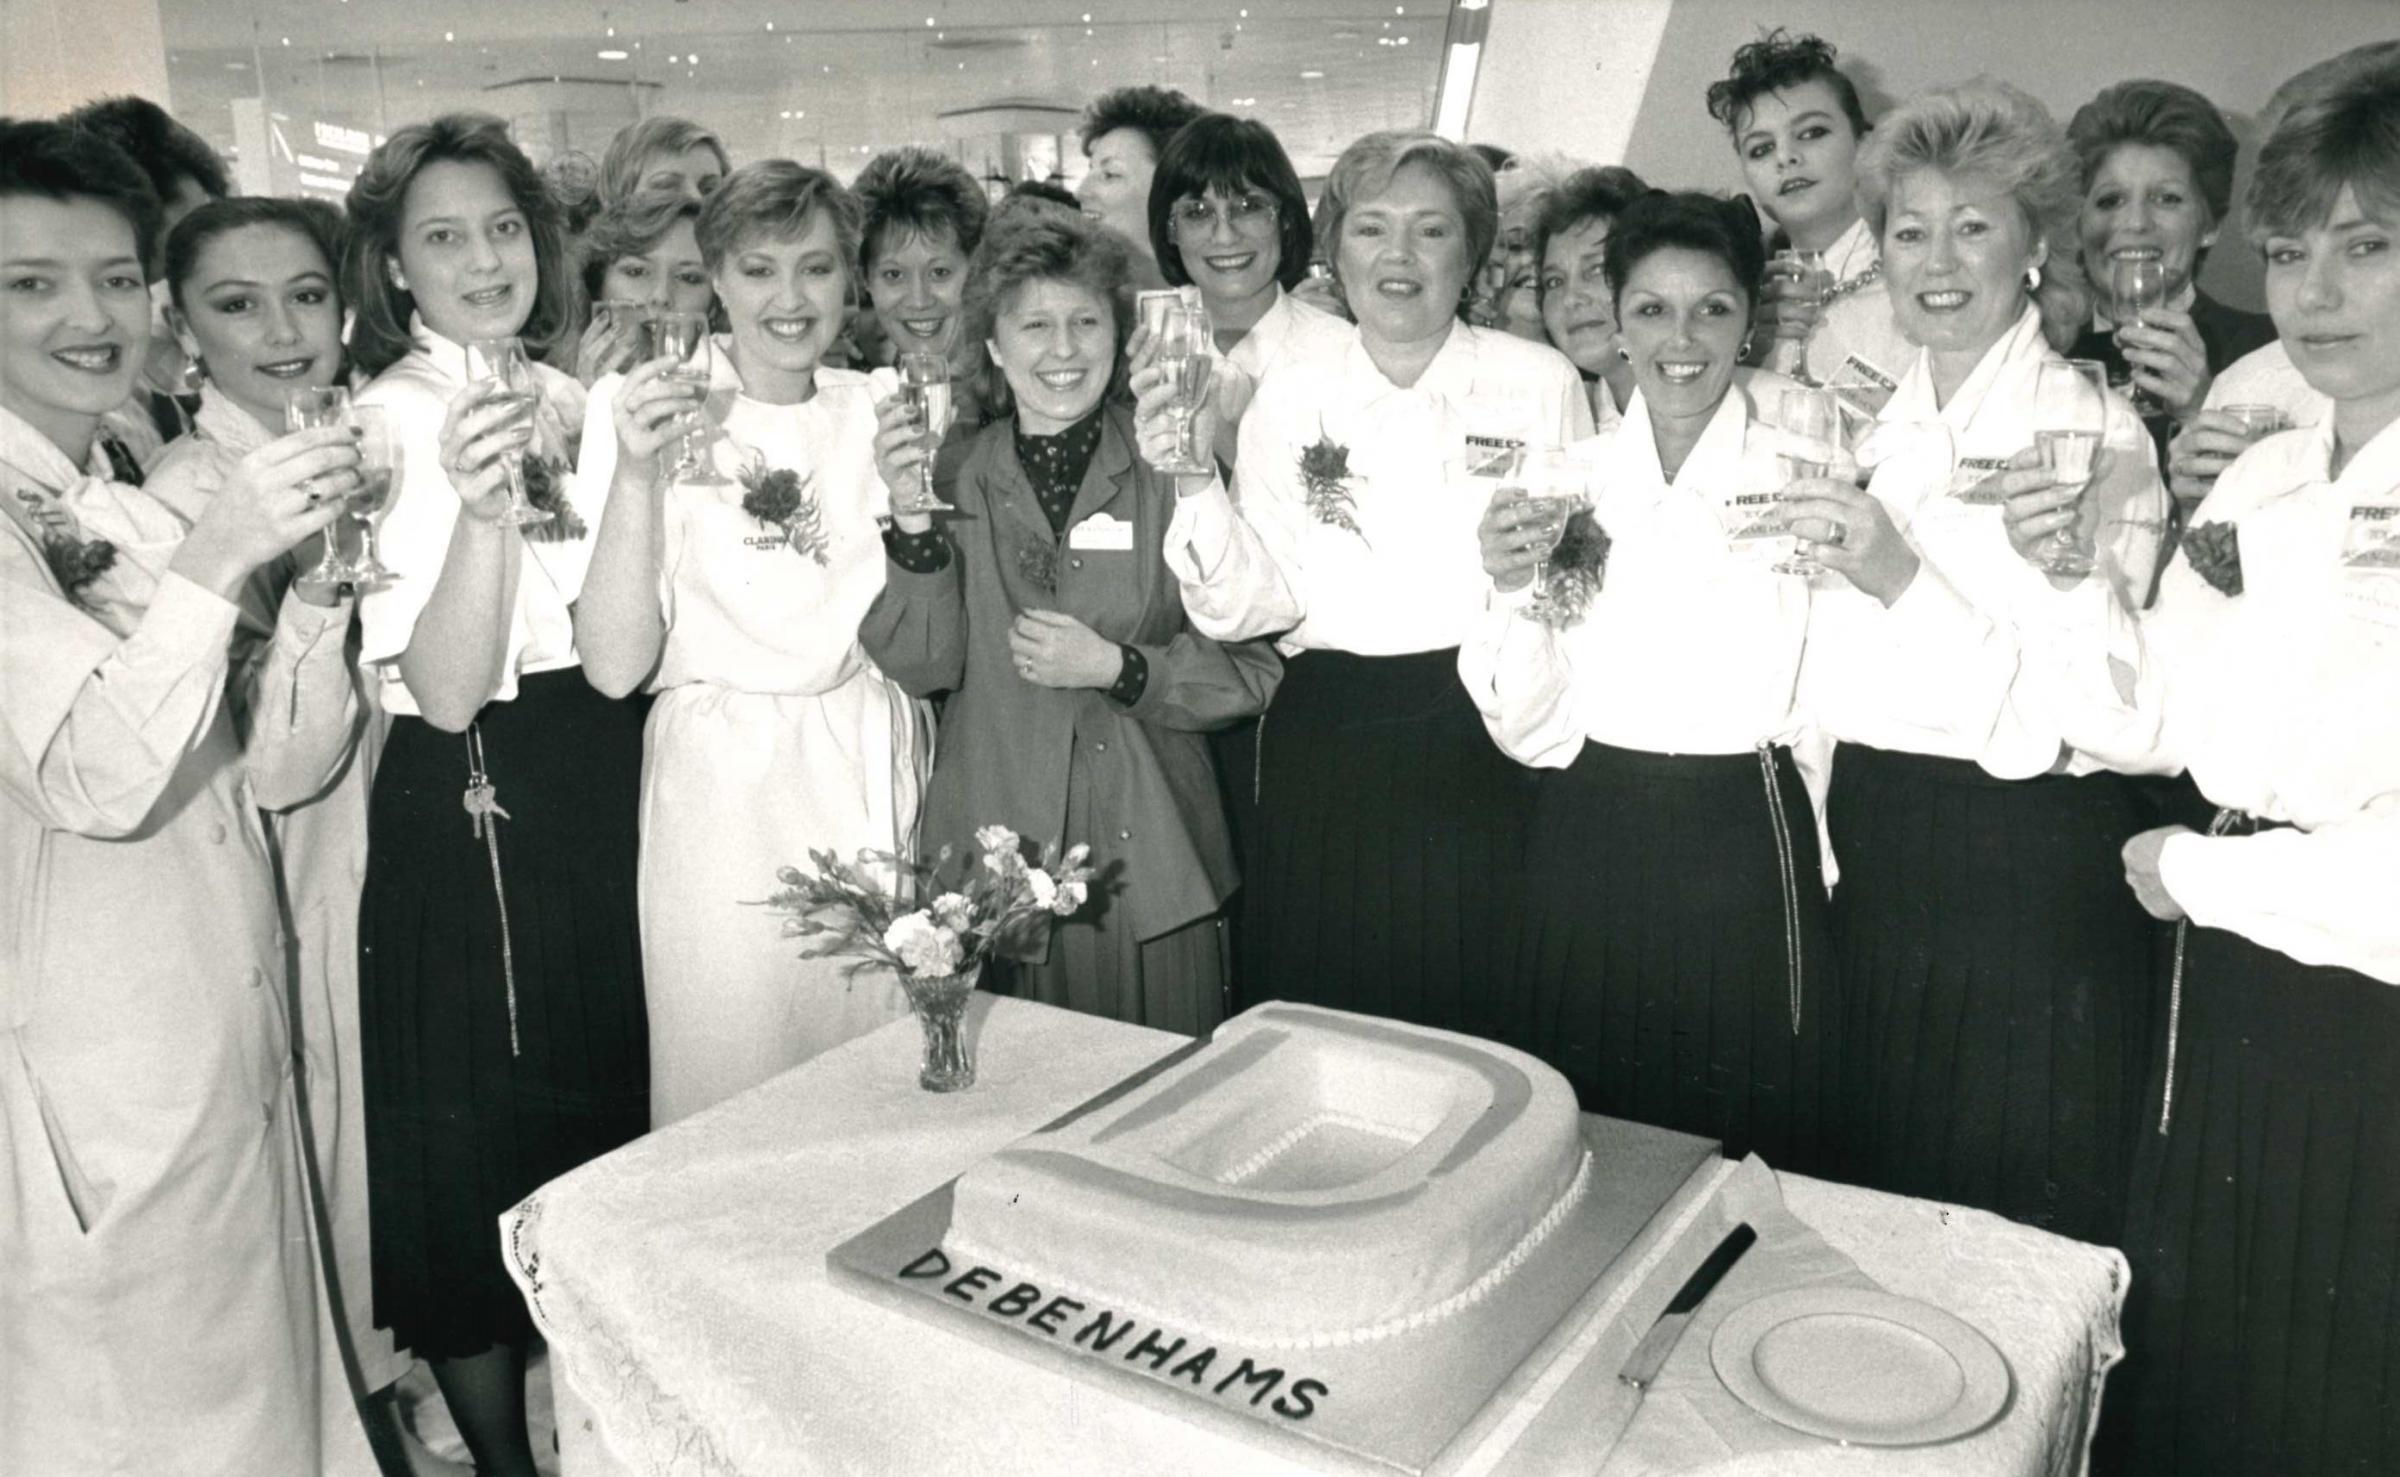 Cheers - staff celebrate the official opening of Debenhams in October 1987.